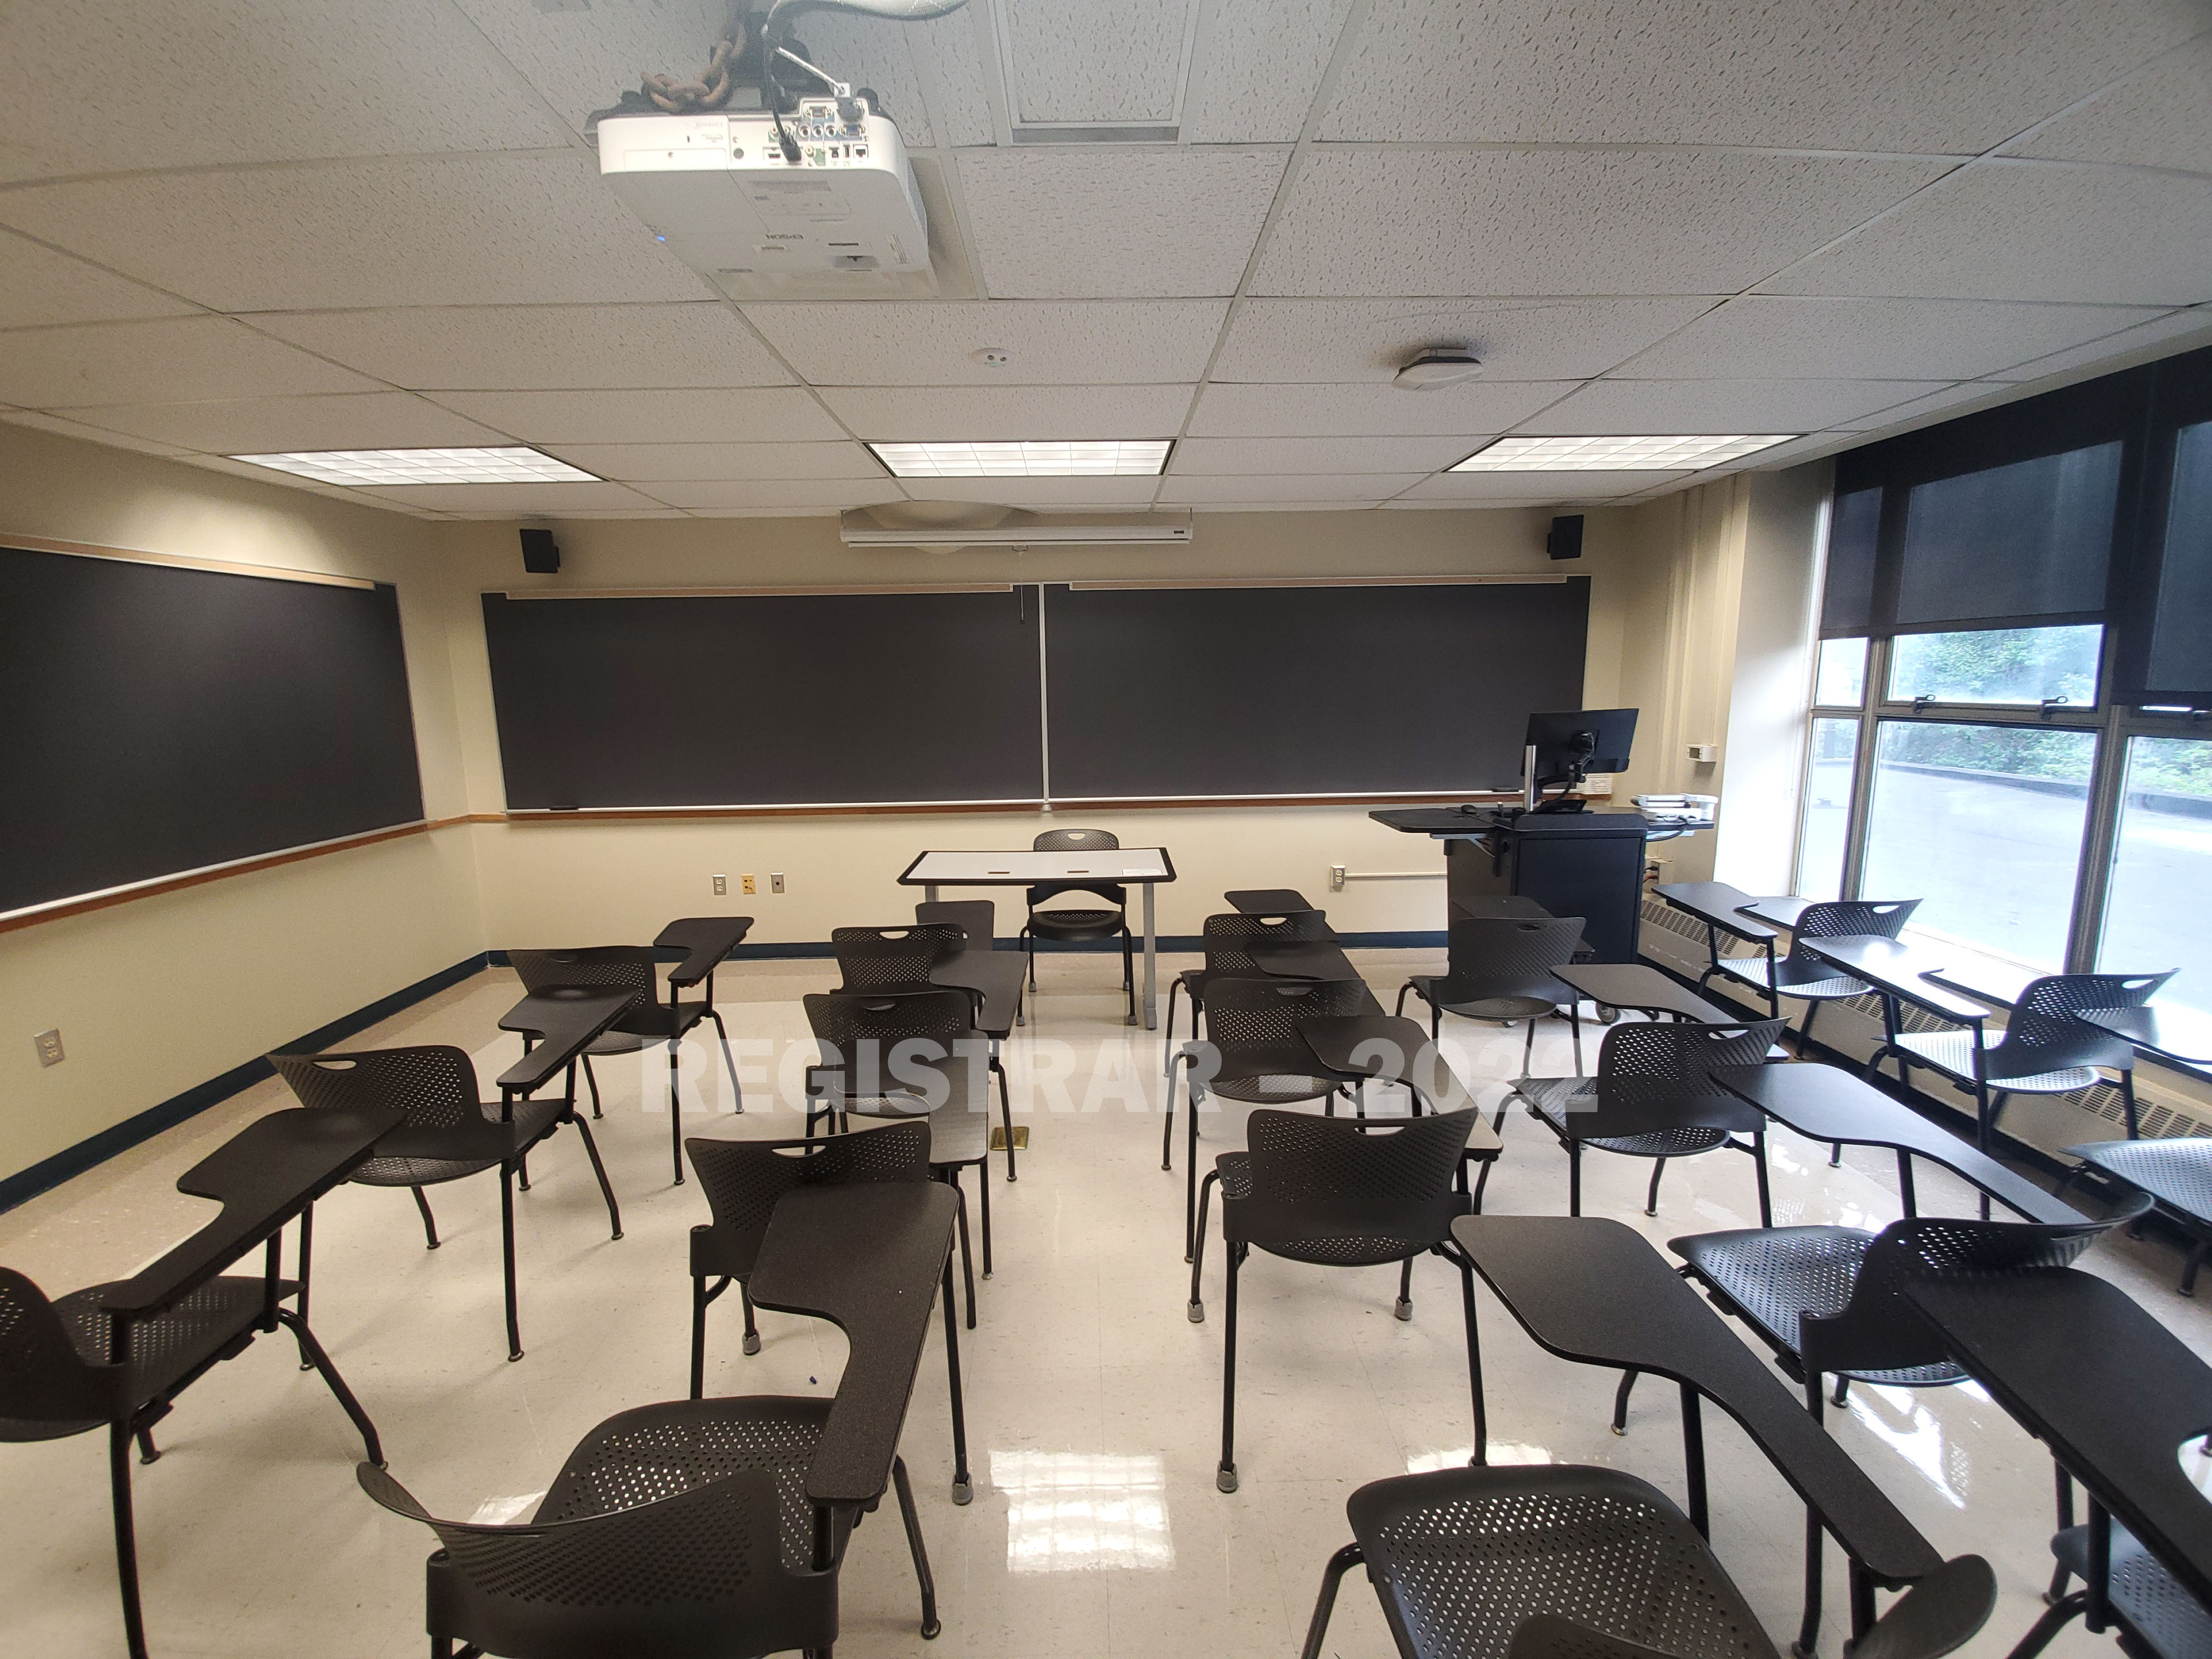 Enarson Classroom Building room 214 ultra wide angle view from the back of the room